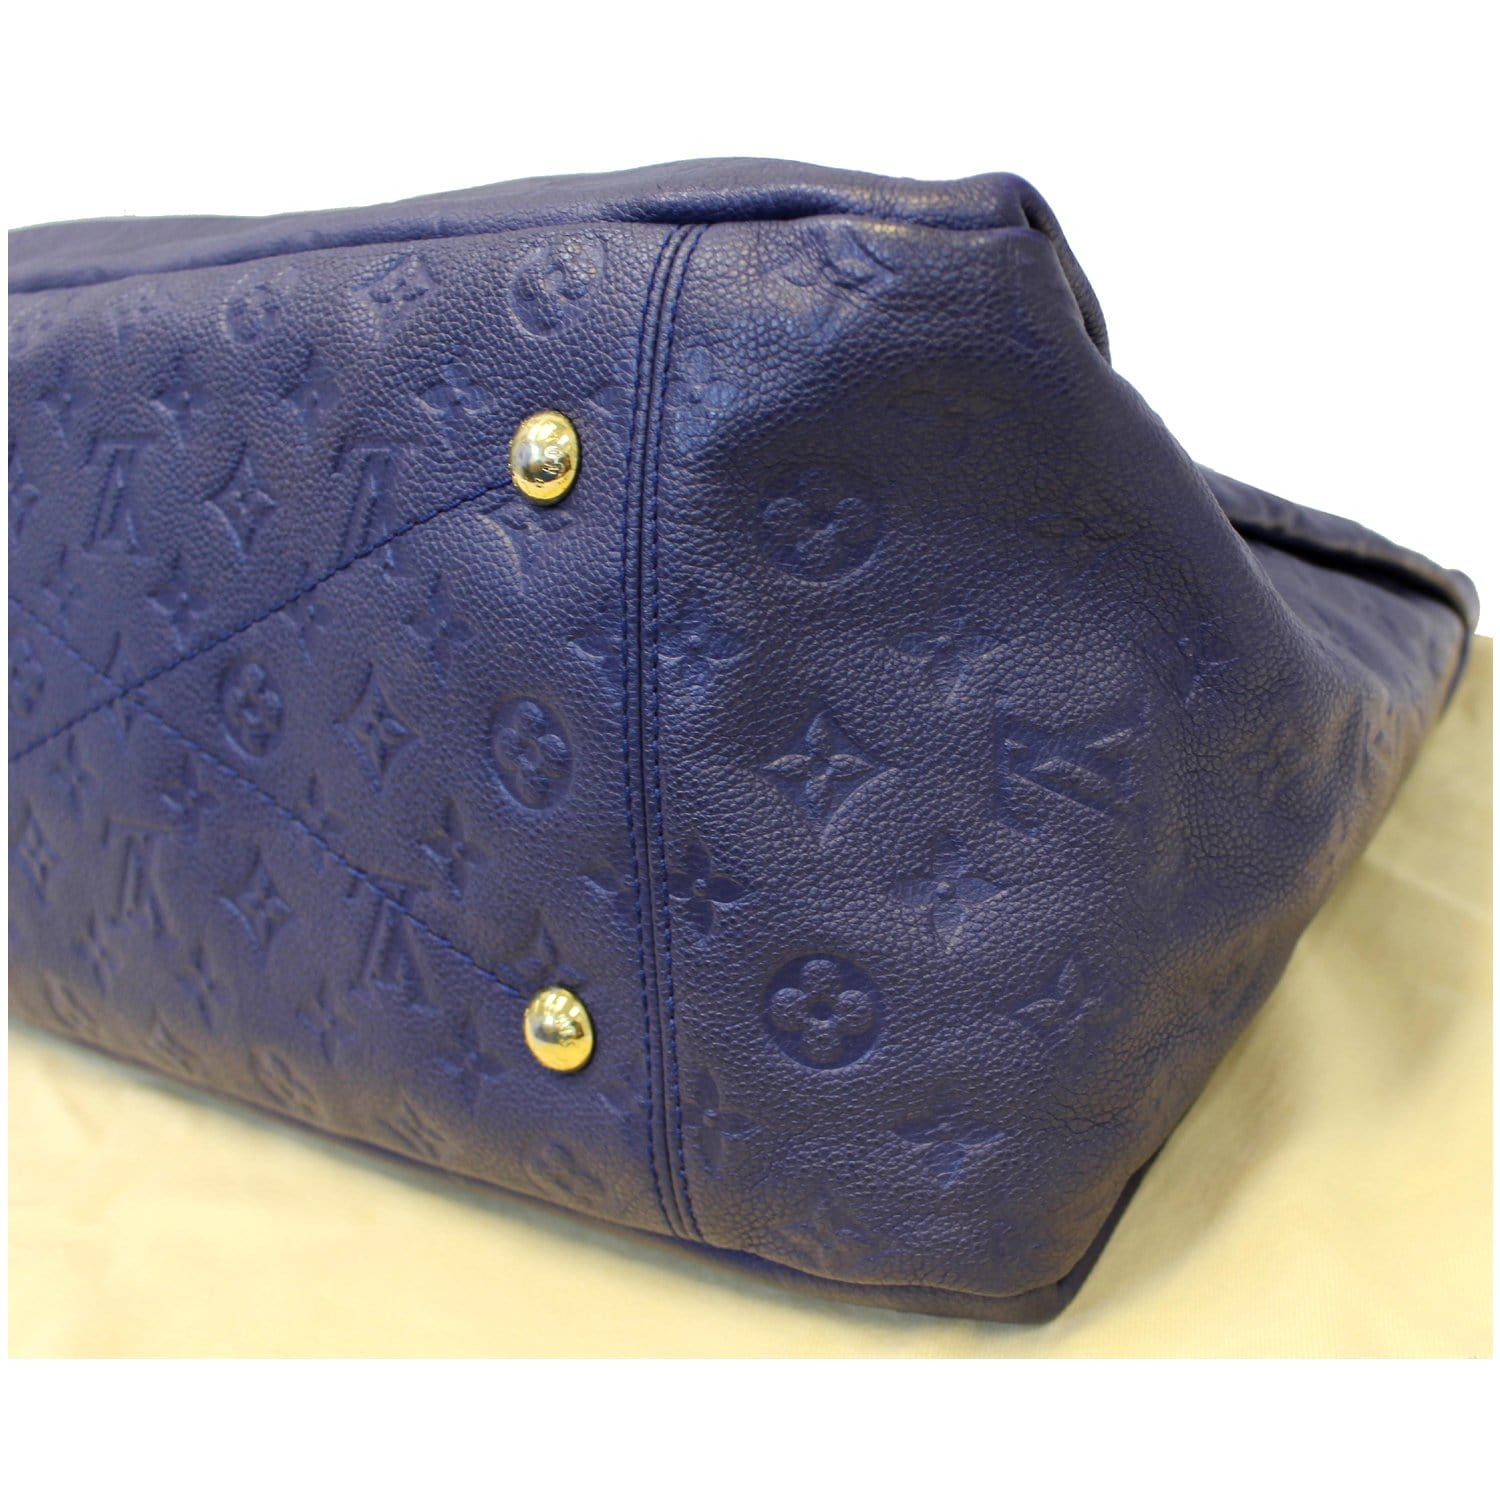 Artsy leather handbag Louis Vuitton Navy in Leather - 31744939